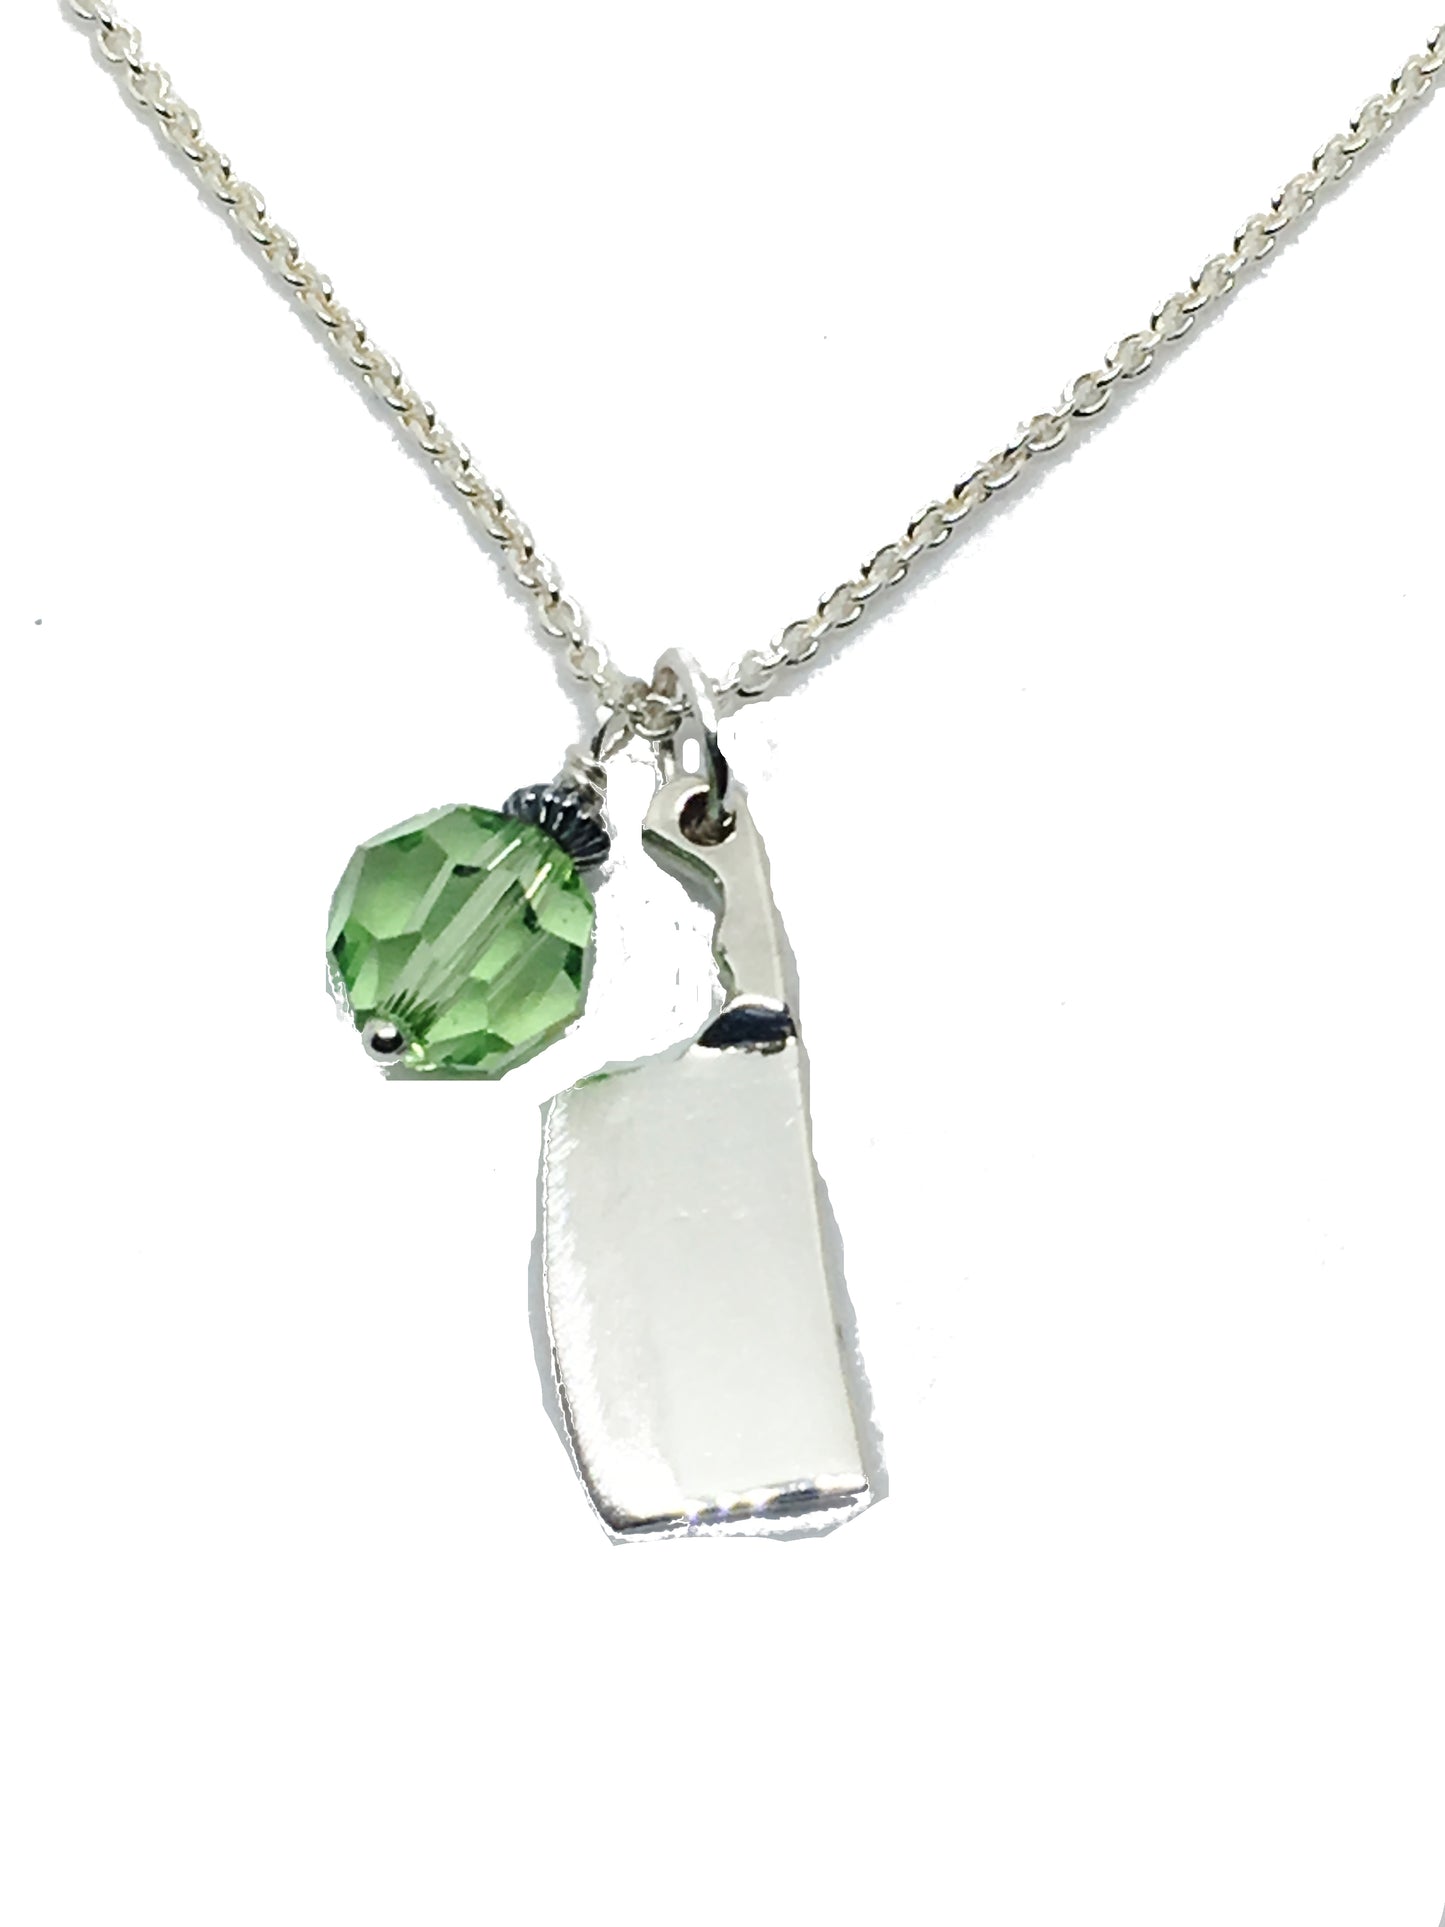 sterling silver cleaver pendant necklace with green crystal dangle charm